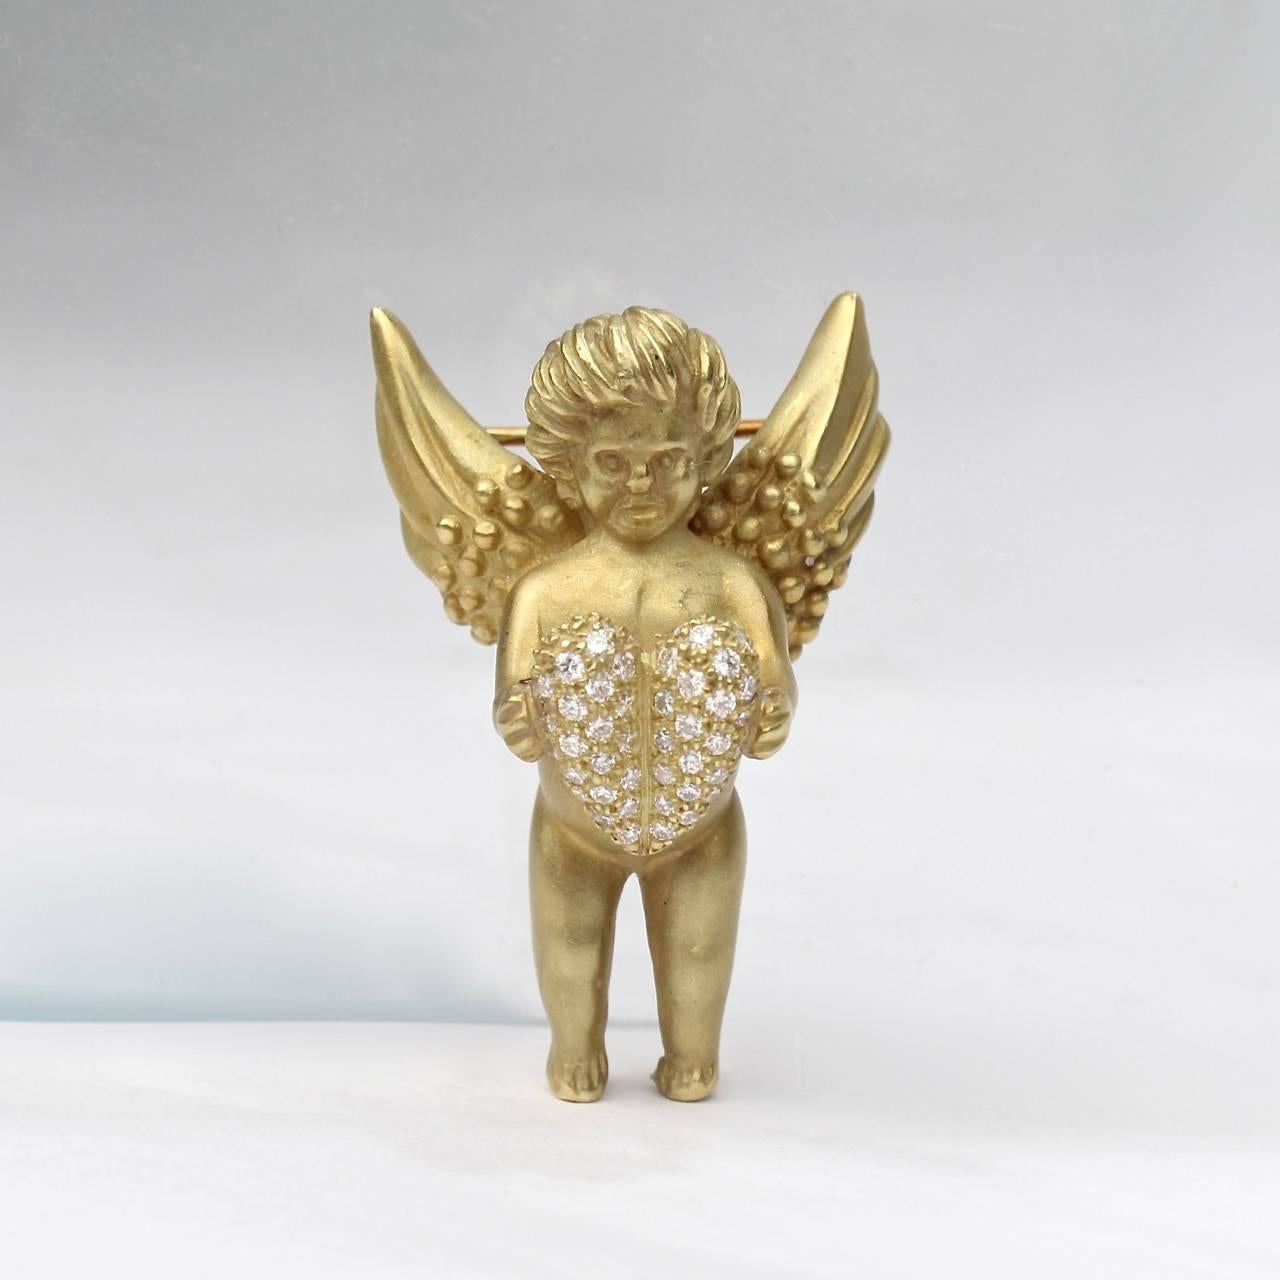 A charming variation on jewelry designer Barry Kieselstein-Cord's Angel or Cupid brooch. 

The cupid figure (or angel) stands with wings spread and outstretched hands holding a heart.

This variant has a matte gold finish and is set with over 80